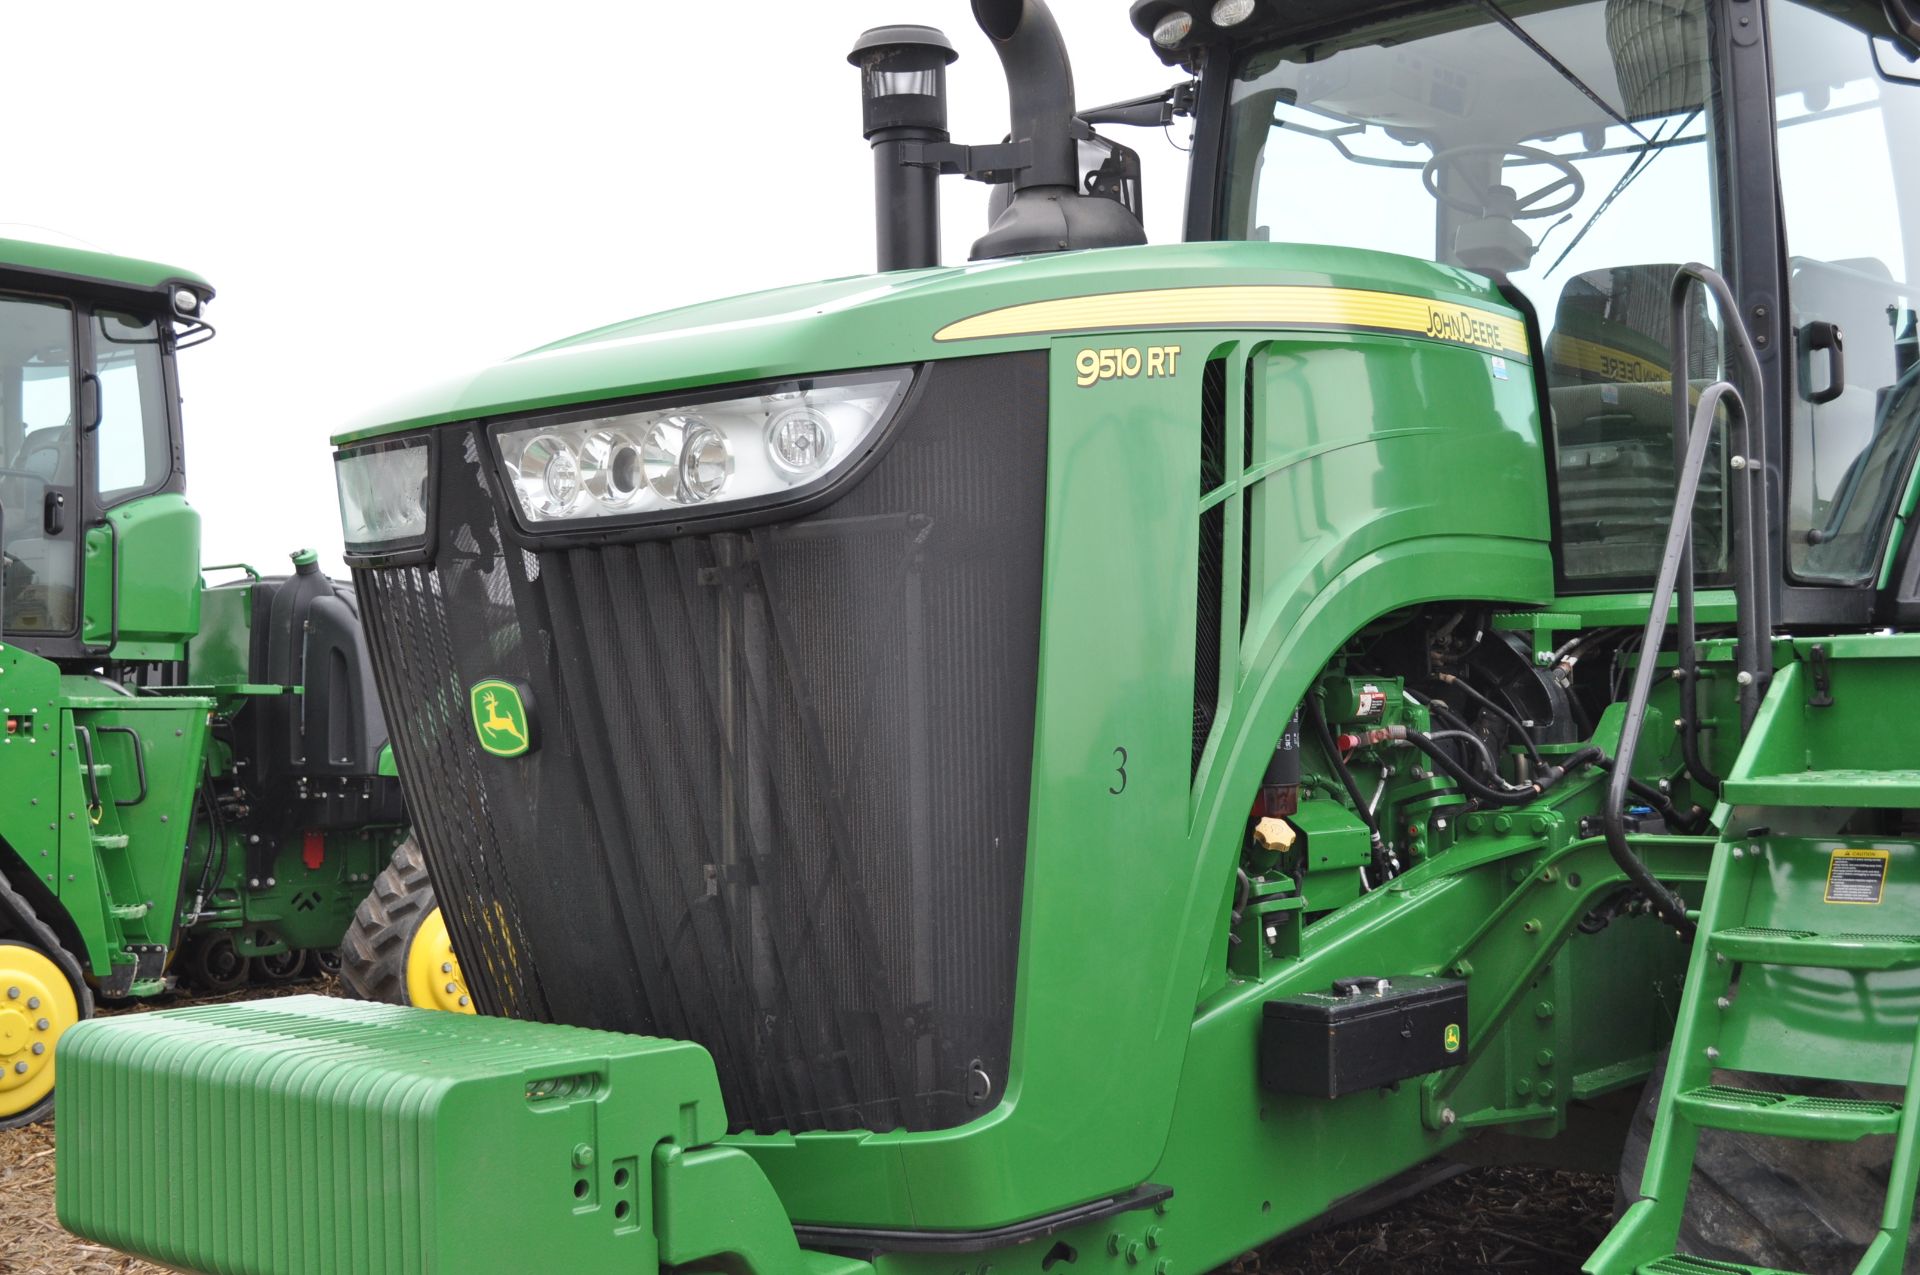 John Deere 9510RT track tractor, 36” belts, front weights, Powershift, 5 hyd remotes, 1000 PTO - Image 18 of 34